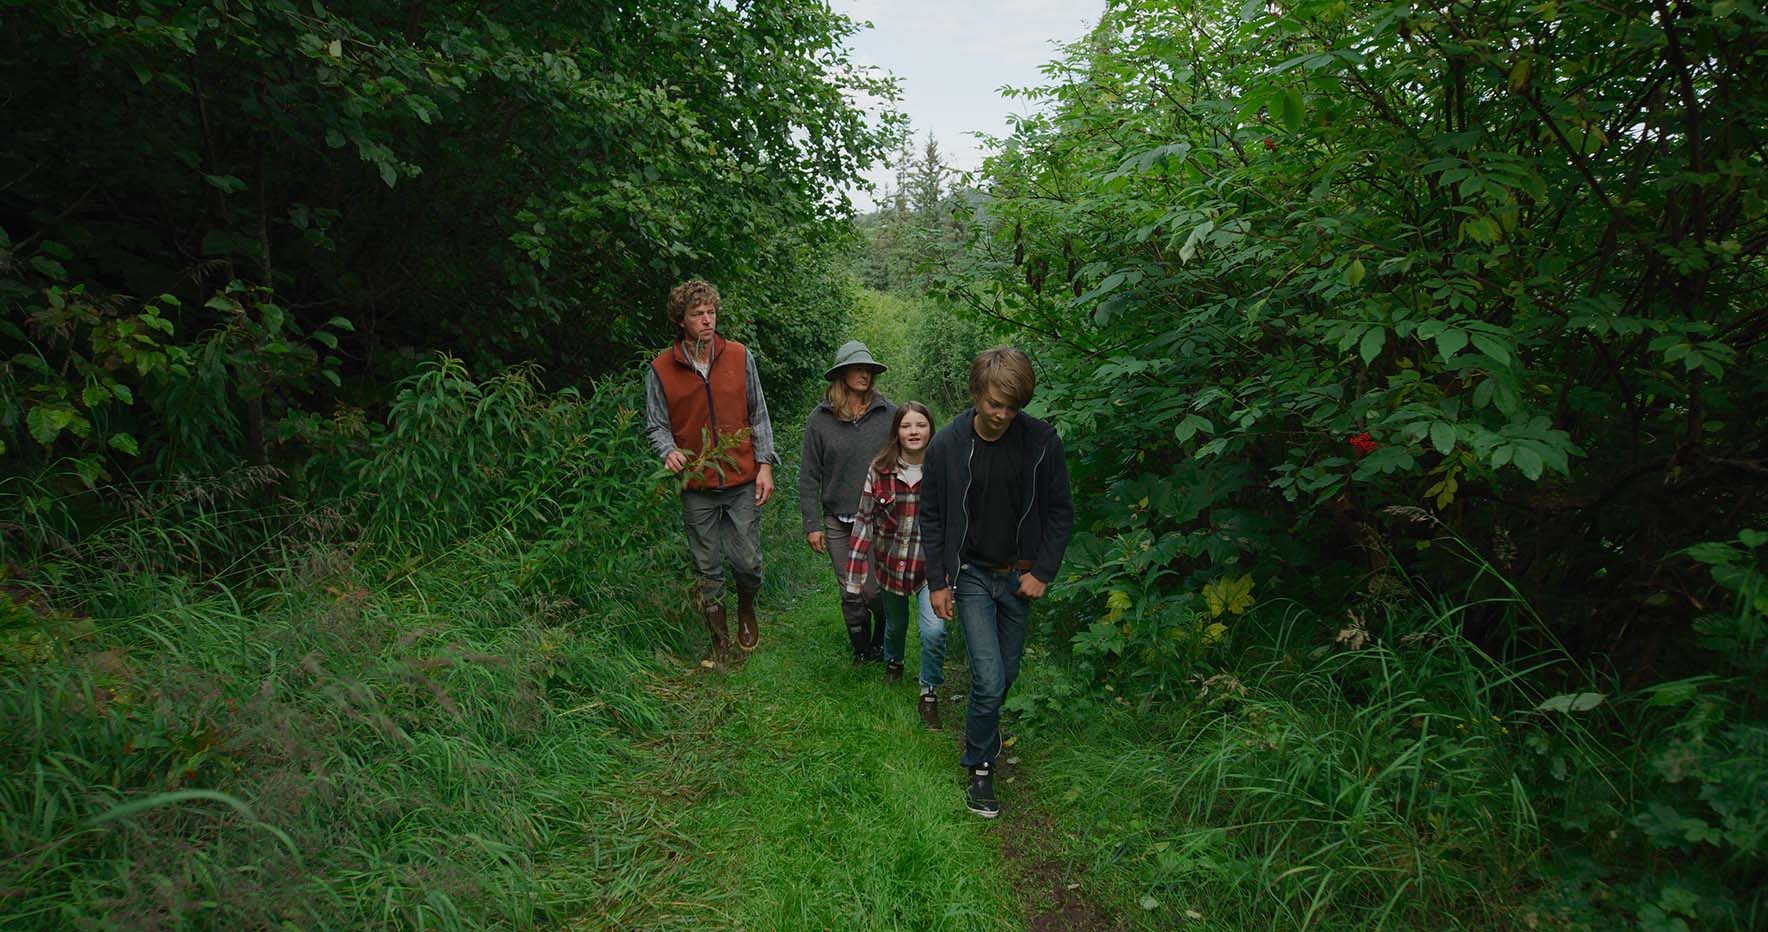 The bates family on a walk through the woods